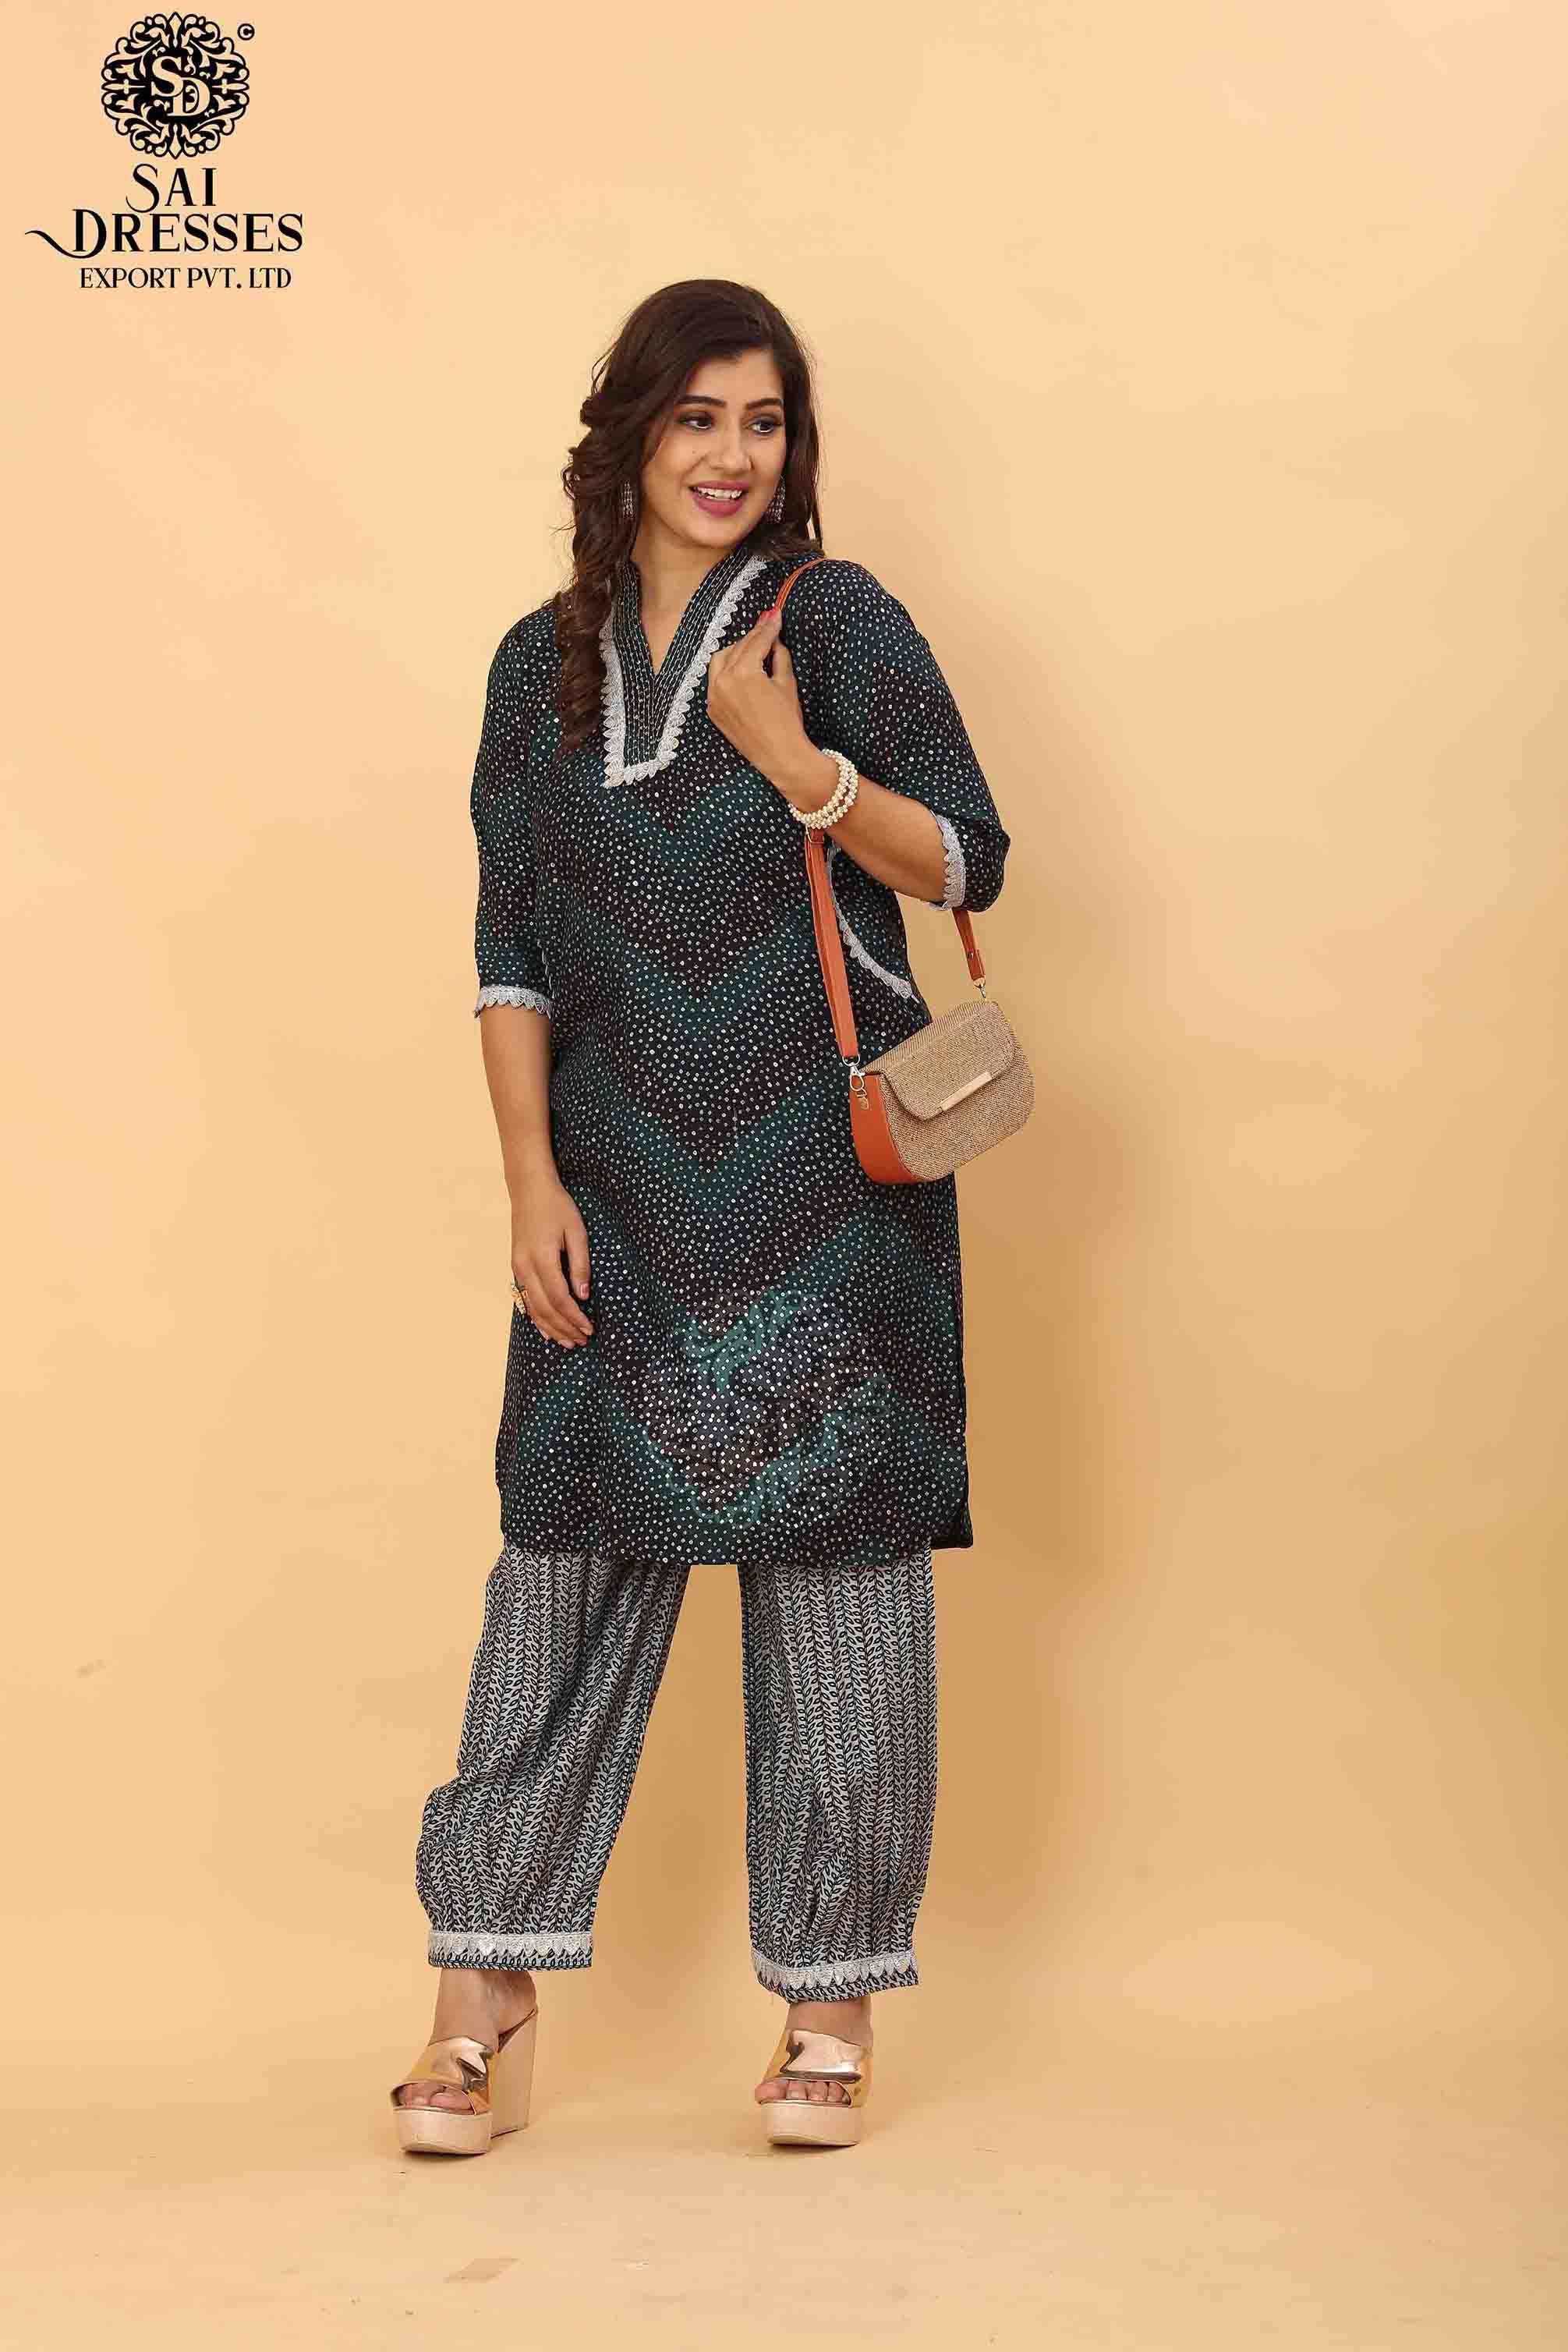 SAI DRESSES PRESENT D.NO SD 5020 READY TO EXCLUSIVE TRENDY WEAR PATHANI KURTA WITH AFGHANI PANT STYLE COMBO COLLECTION IN WHOLESALE RATE IN SURAT